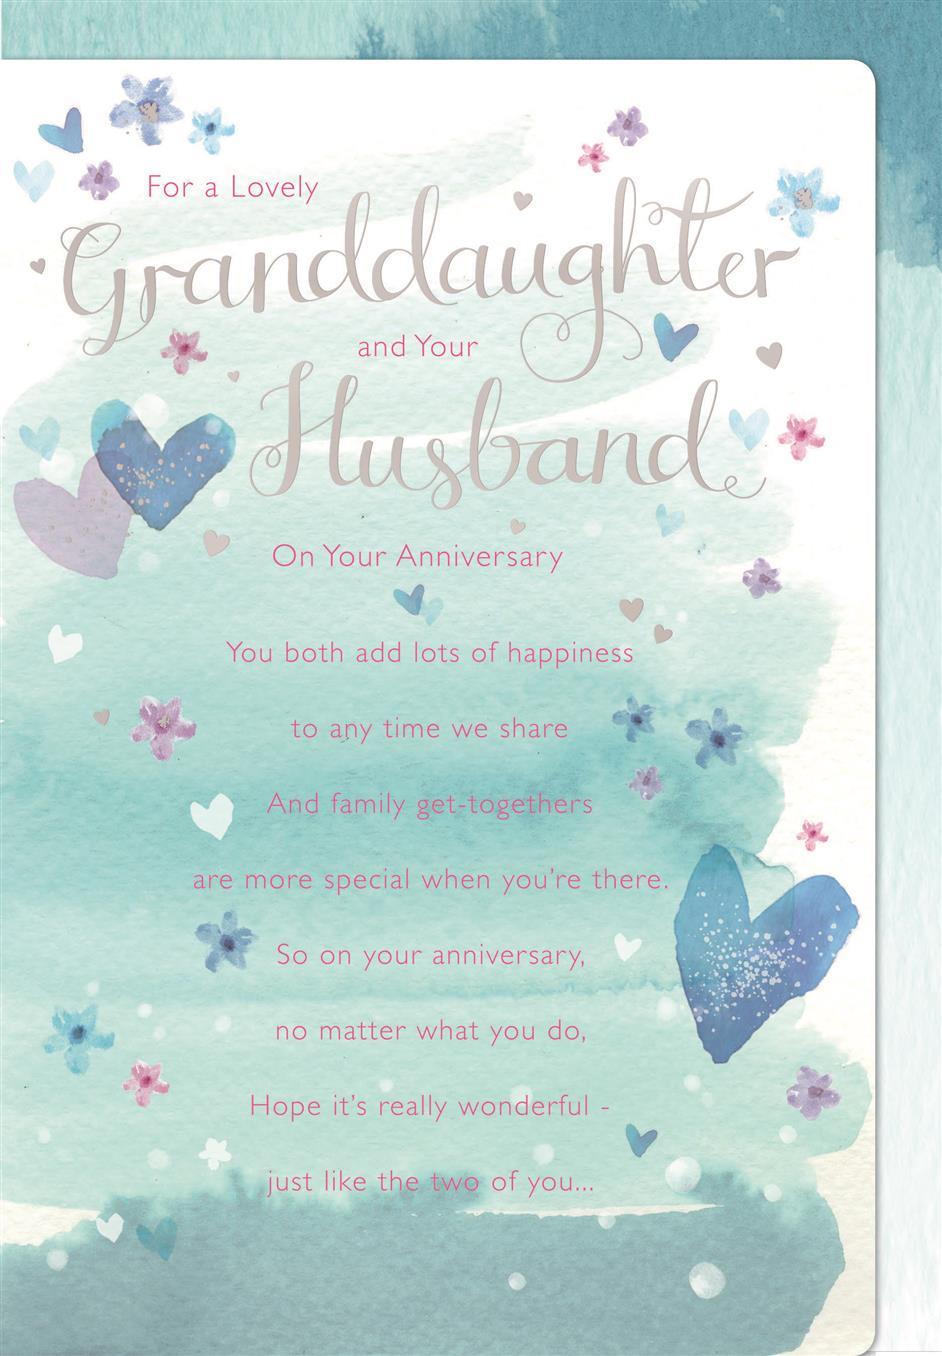 Granddaughter & Husband Anniversary Card - Celebrating Your Love with a Splash of Colors and Heartfelt Wishes